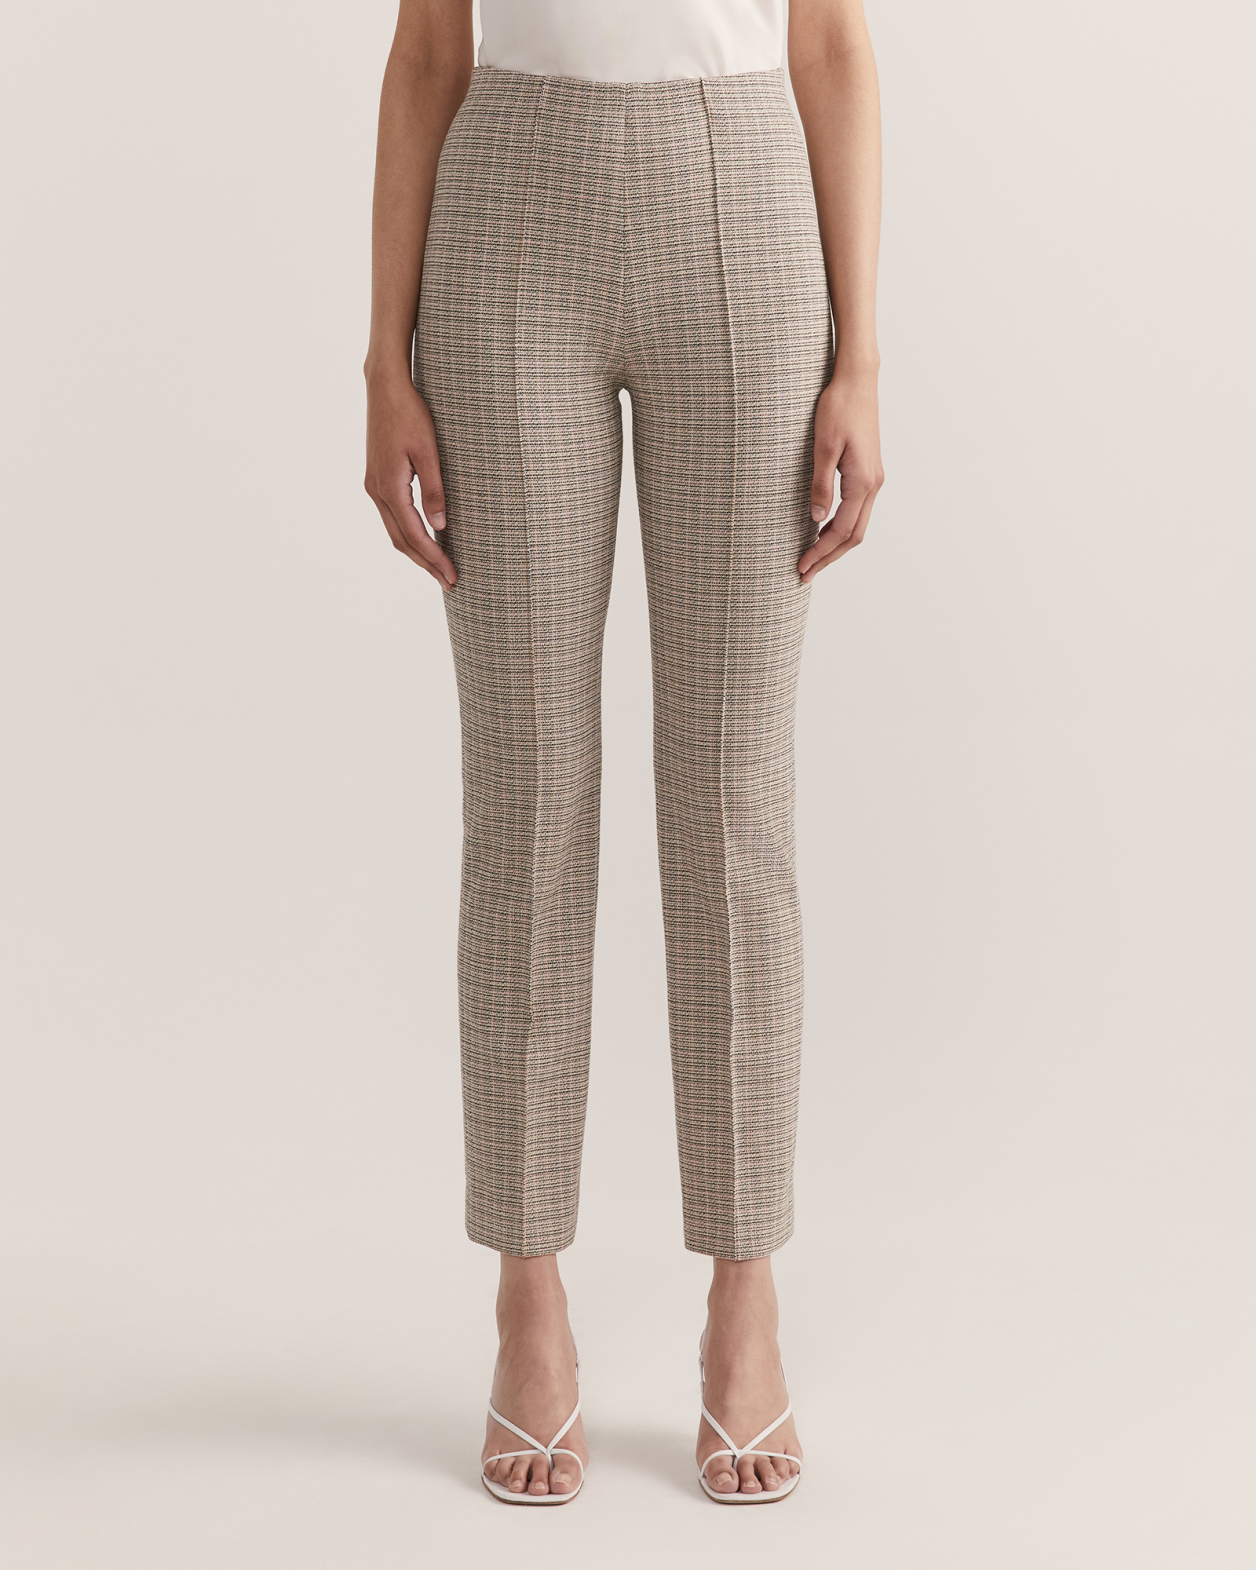 Isla Check Pull On Pant in MULTI